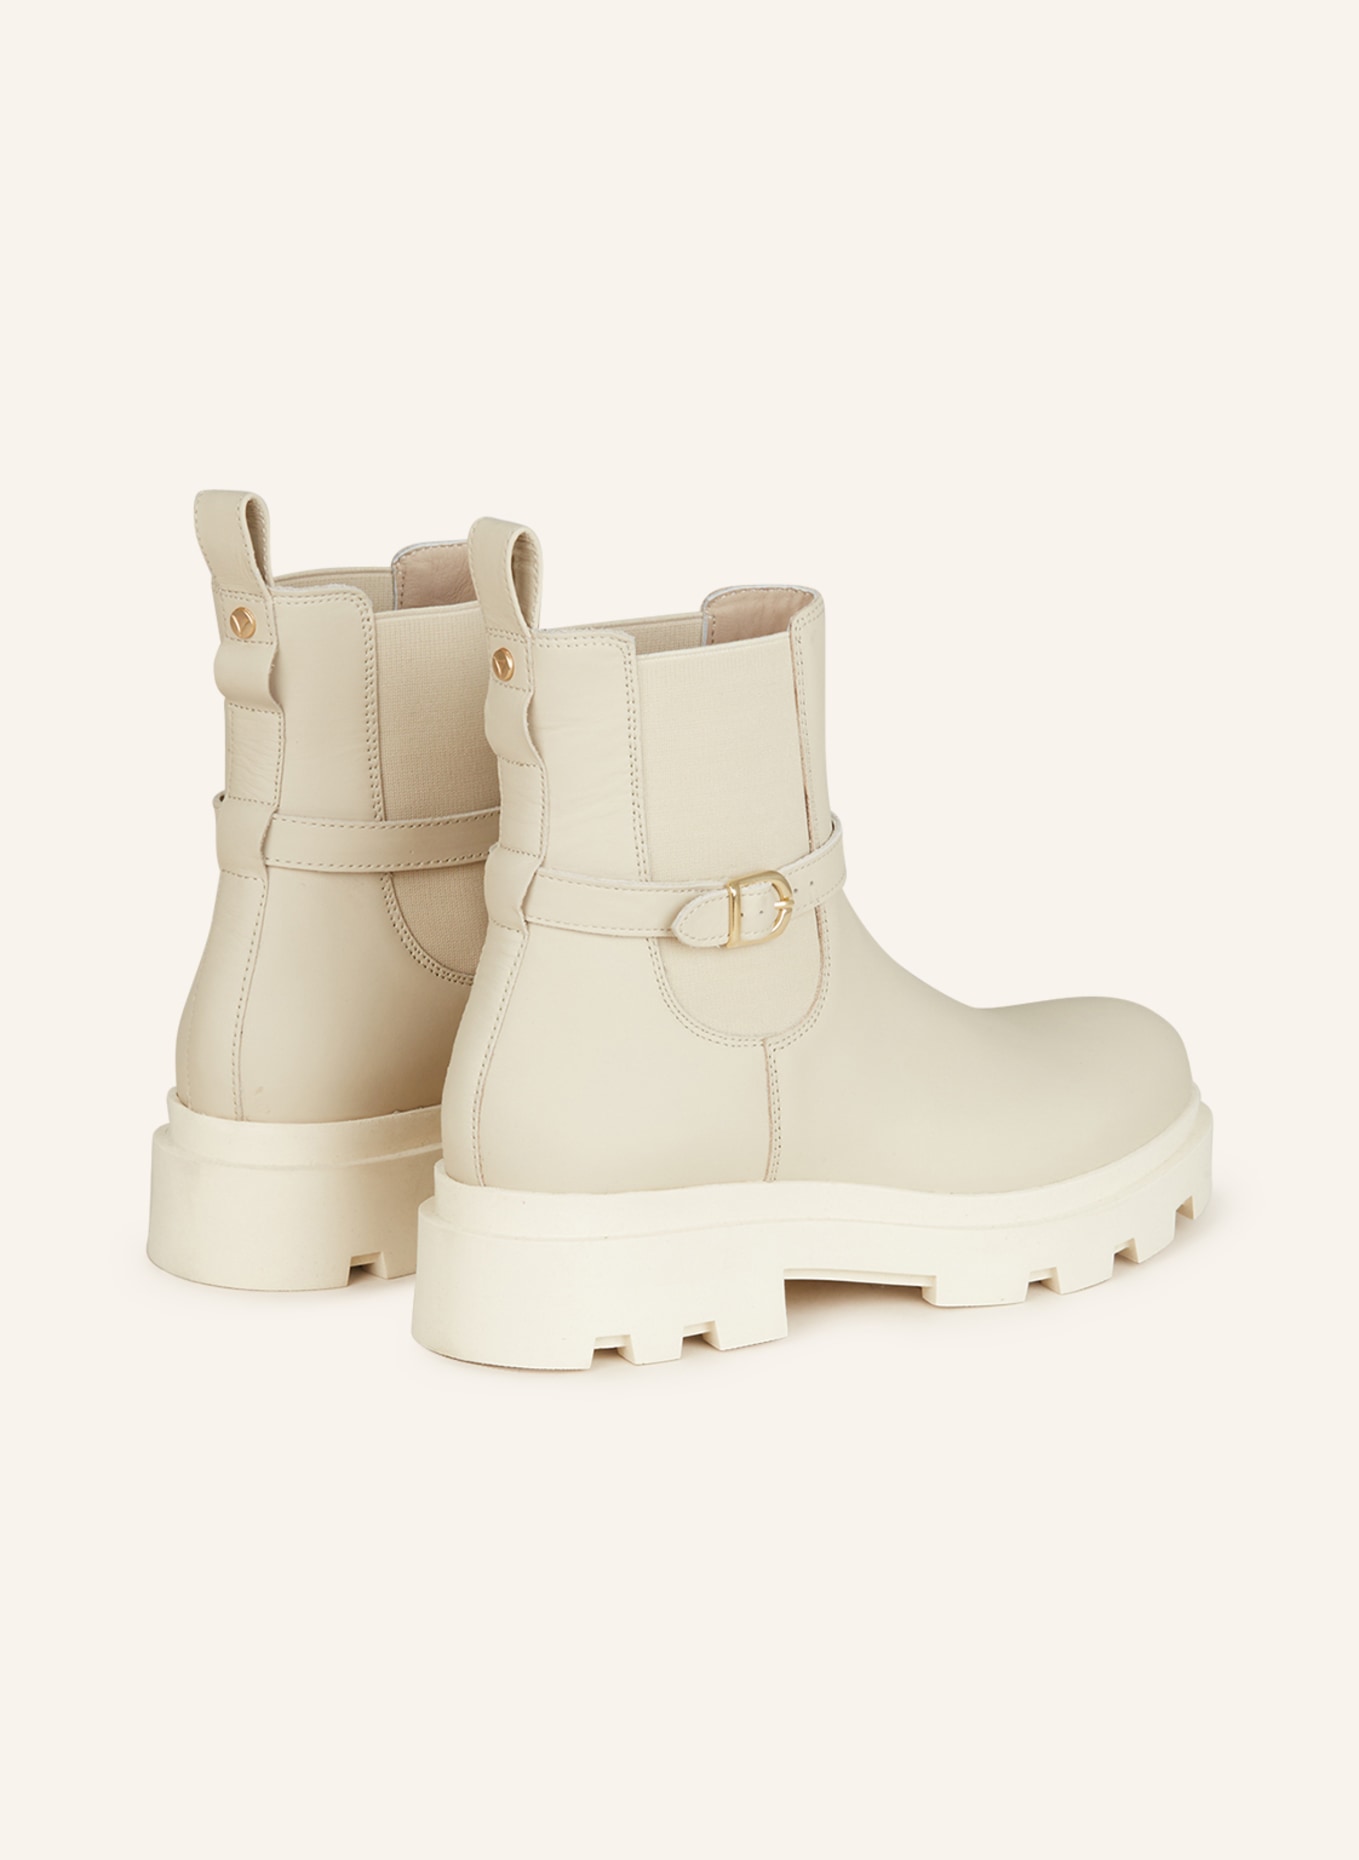 HEY MARLY Chelsea-Boots CLASSY AESTHETIC, Farbe: CREME (Bild 2)